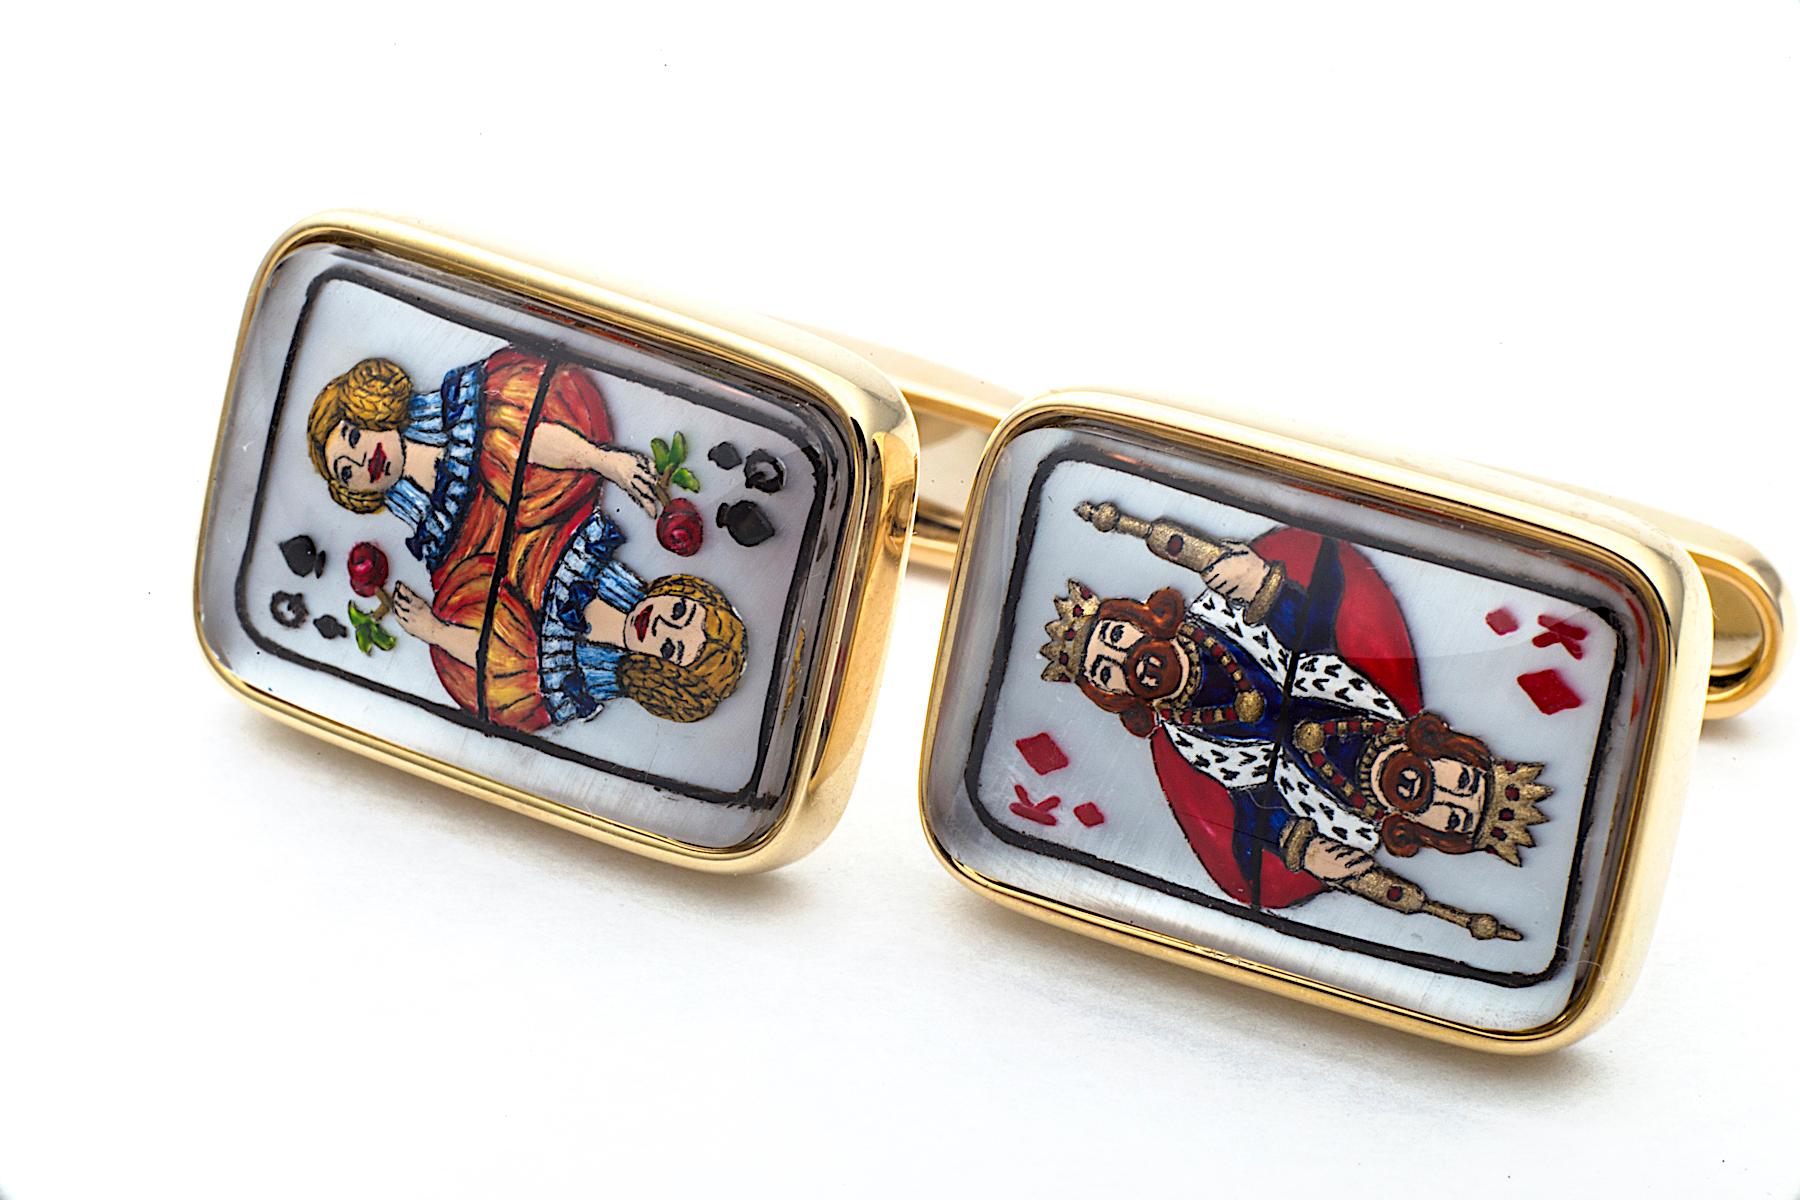 You will be dealt a good hand when wearing these whimsical King and Queen cufflinks!  This one-of-a-kind handmade pair of cufflinks, designed by Steven Fox, has the two royals beautifully reverse-enameled into carved rock crystal and applied onto a